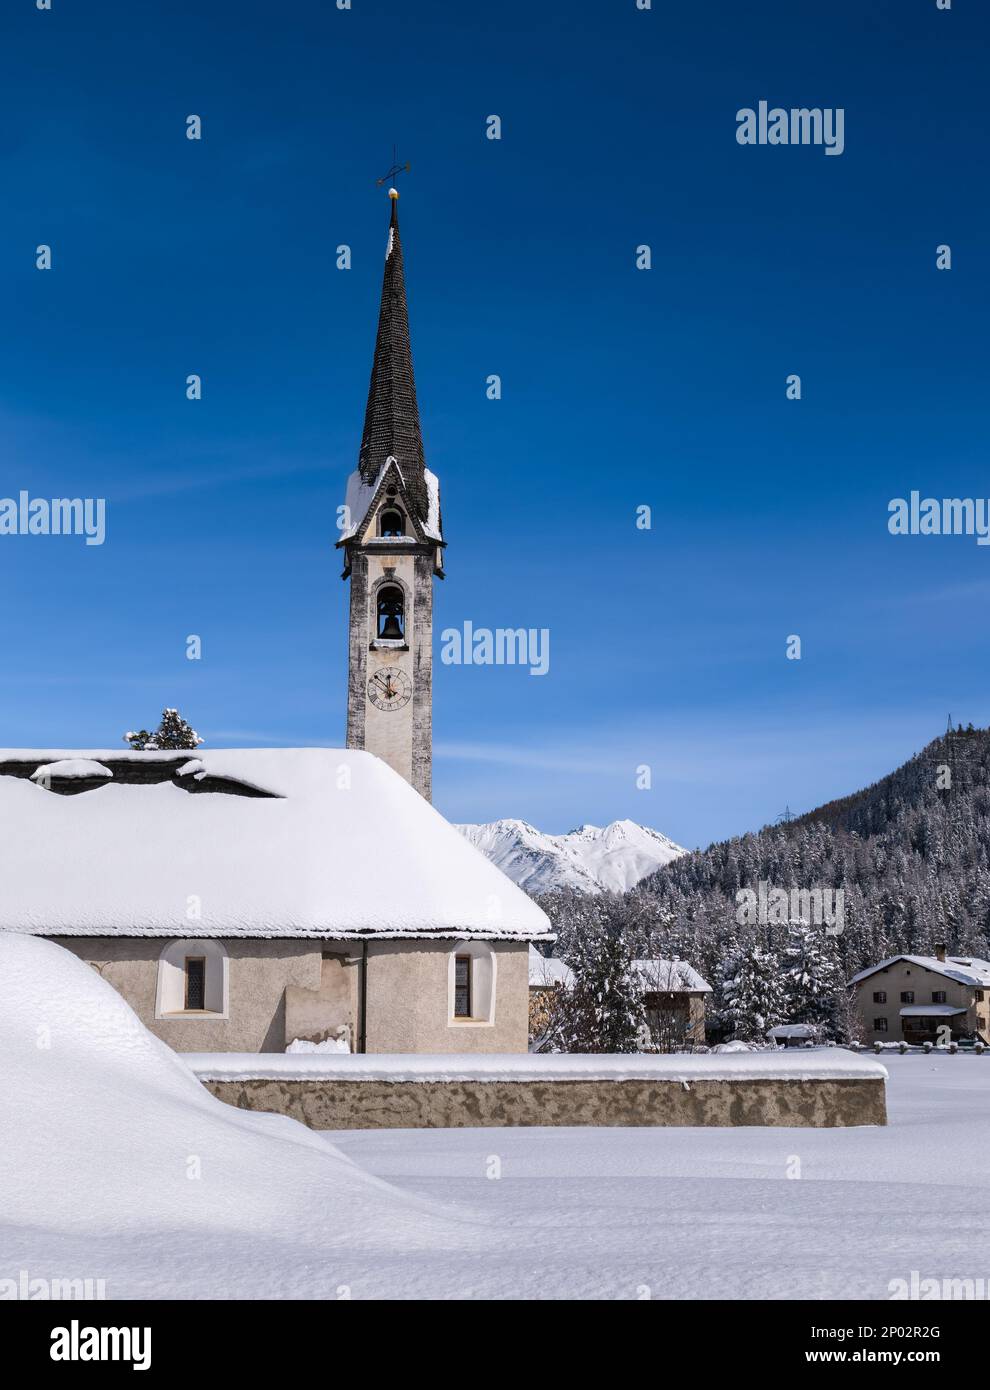 Reformed church in the snowy village of Cinuos Chel in the Engadin, Graubunden, Switzerland Stock Photo